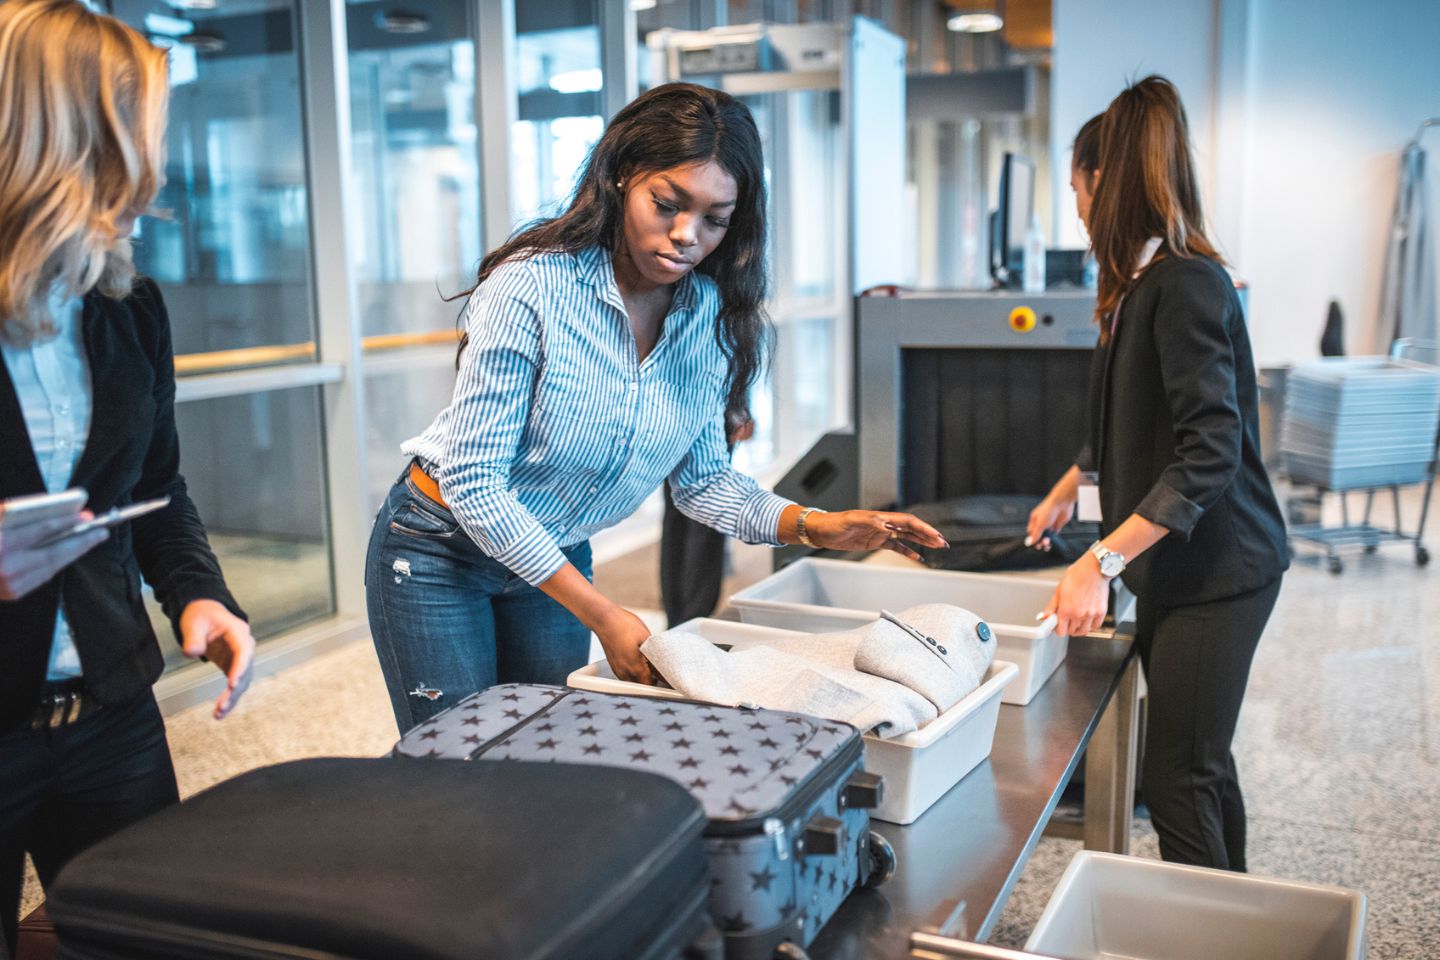 Airports Introduce Reservation Systems For Security Screenings